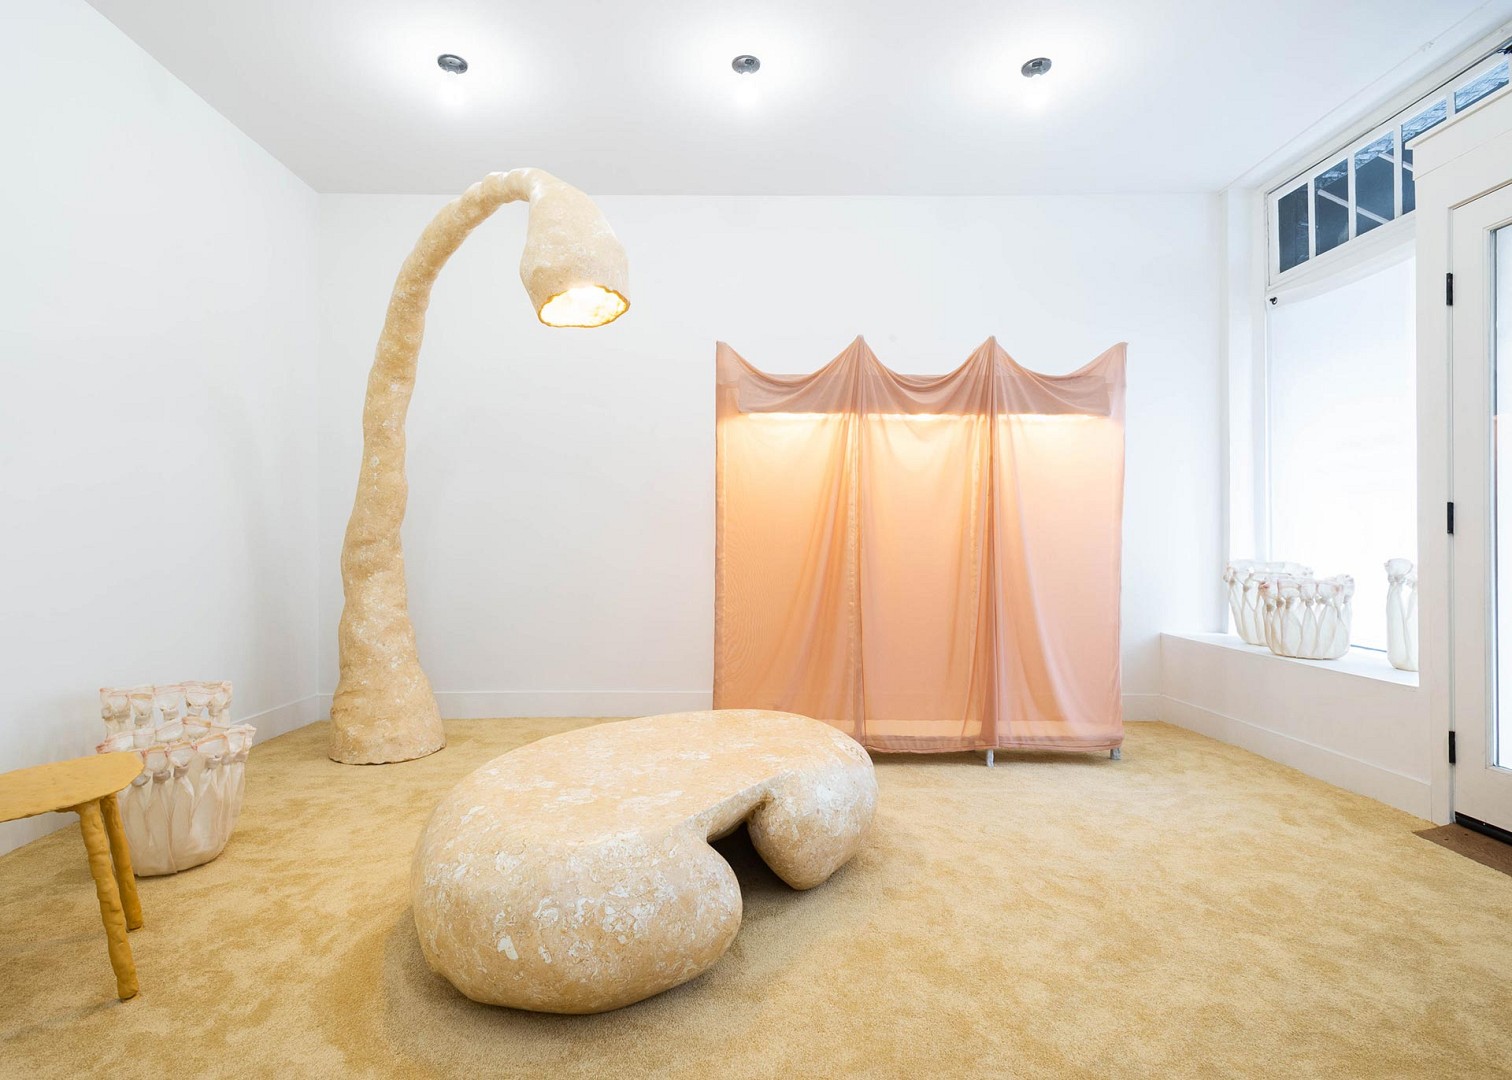 Marta Los Angeles holds a sculptural desert safari with &lsquo;Tino&rsquo;s White Horses&rsquo;